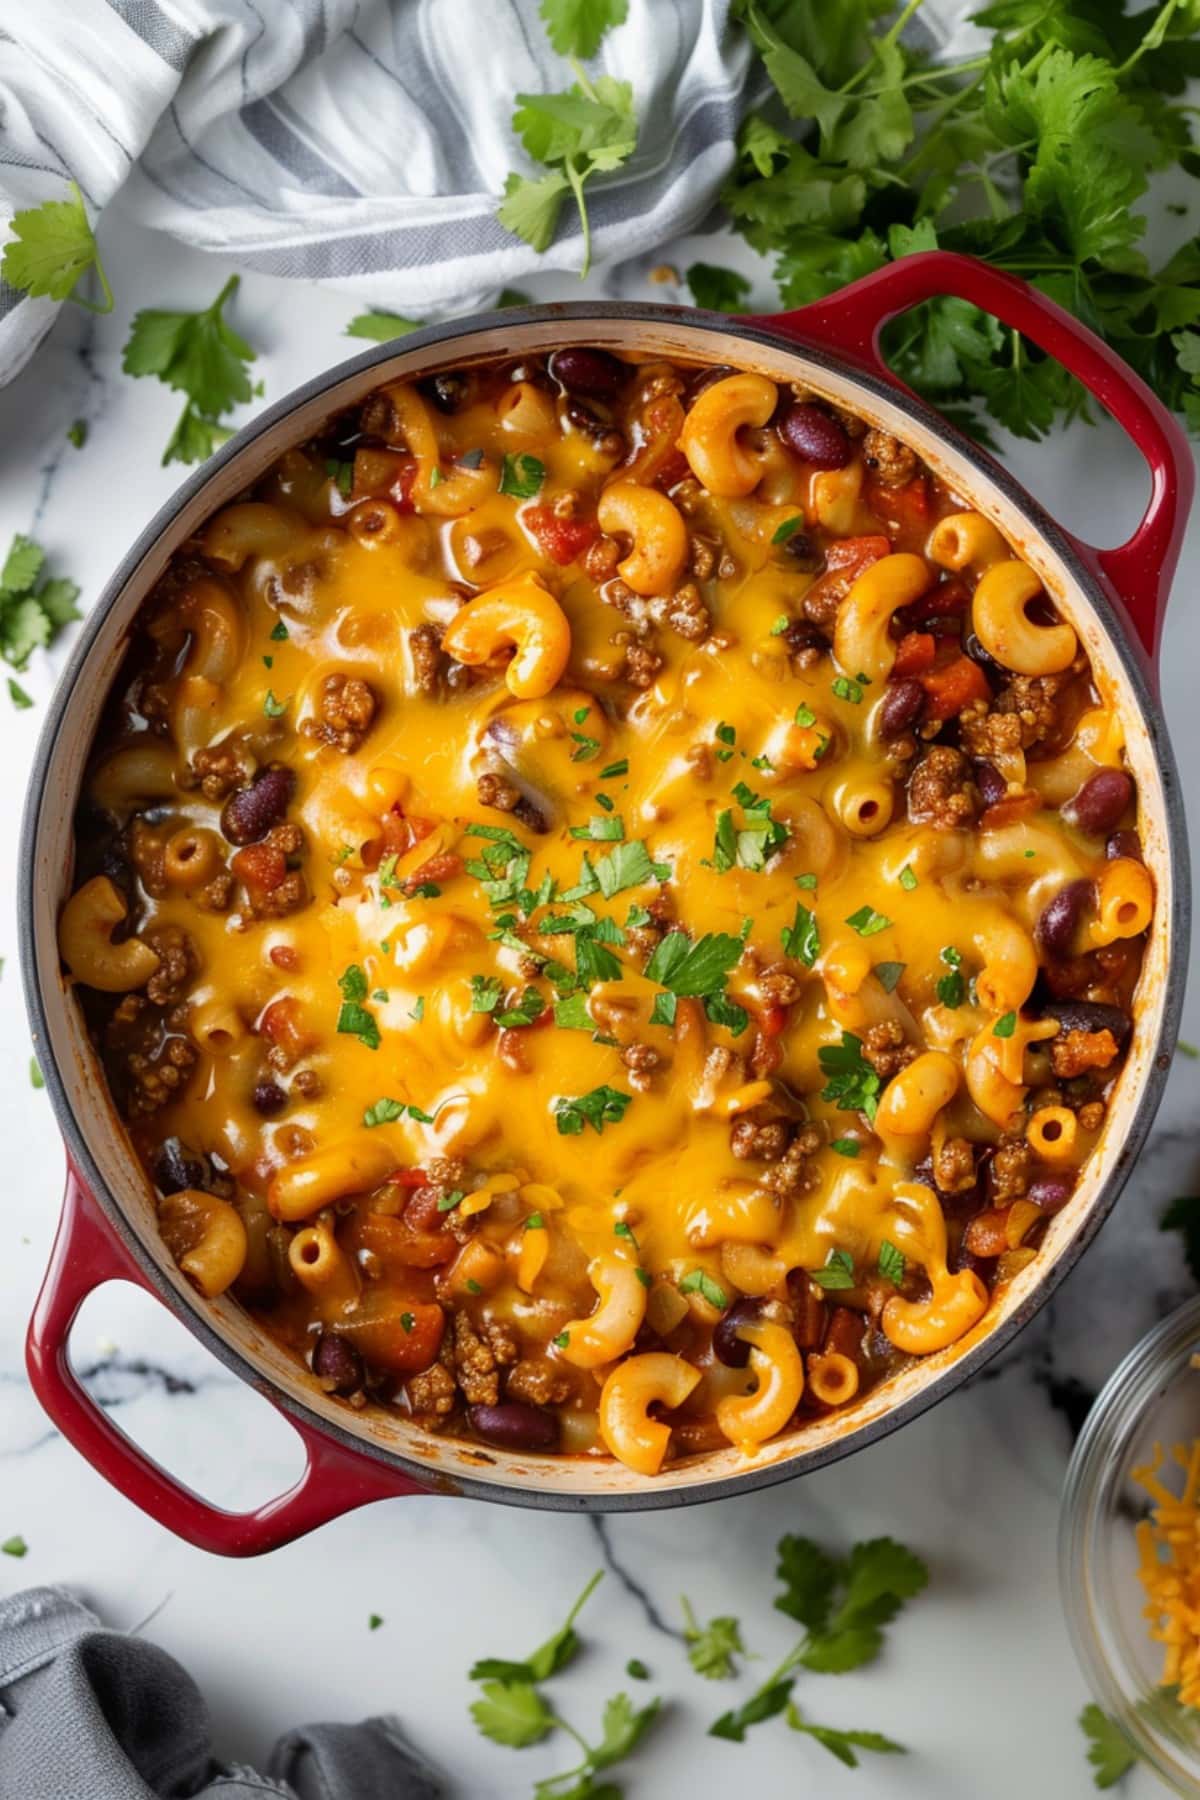 Homemade Chili Mac in a red stock pot